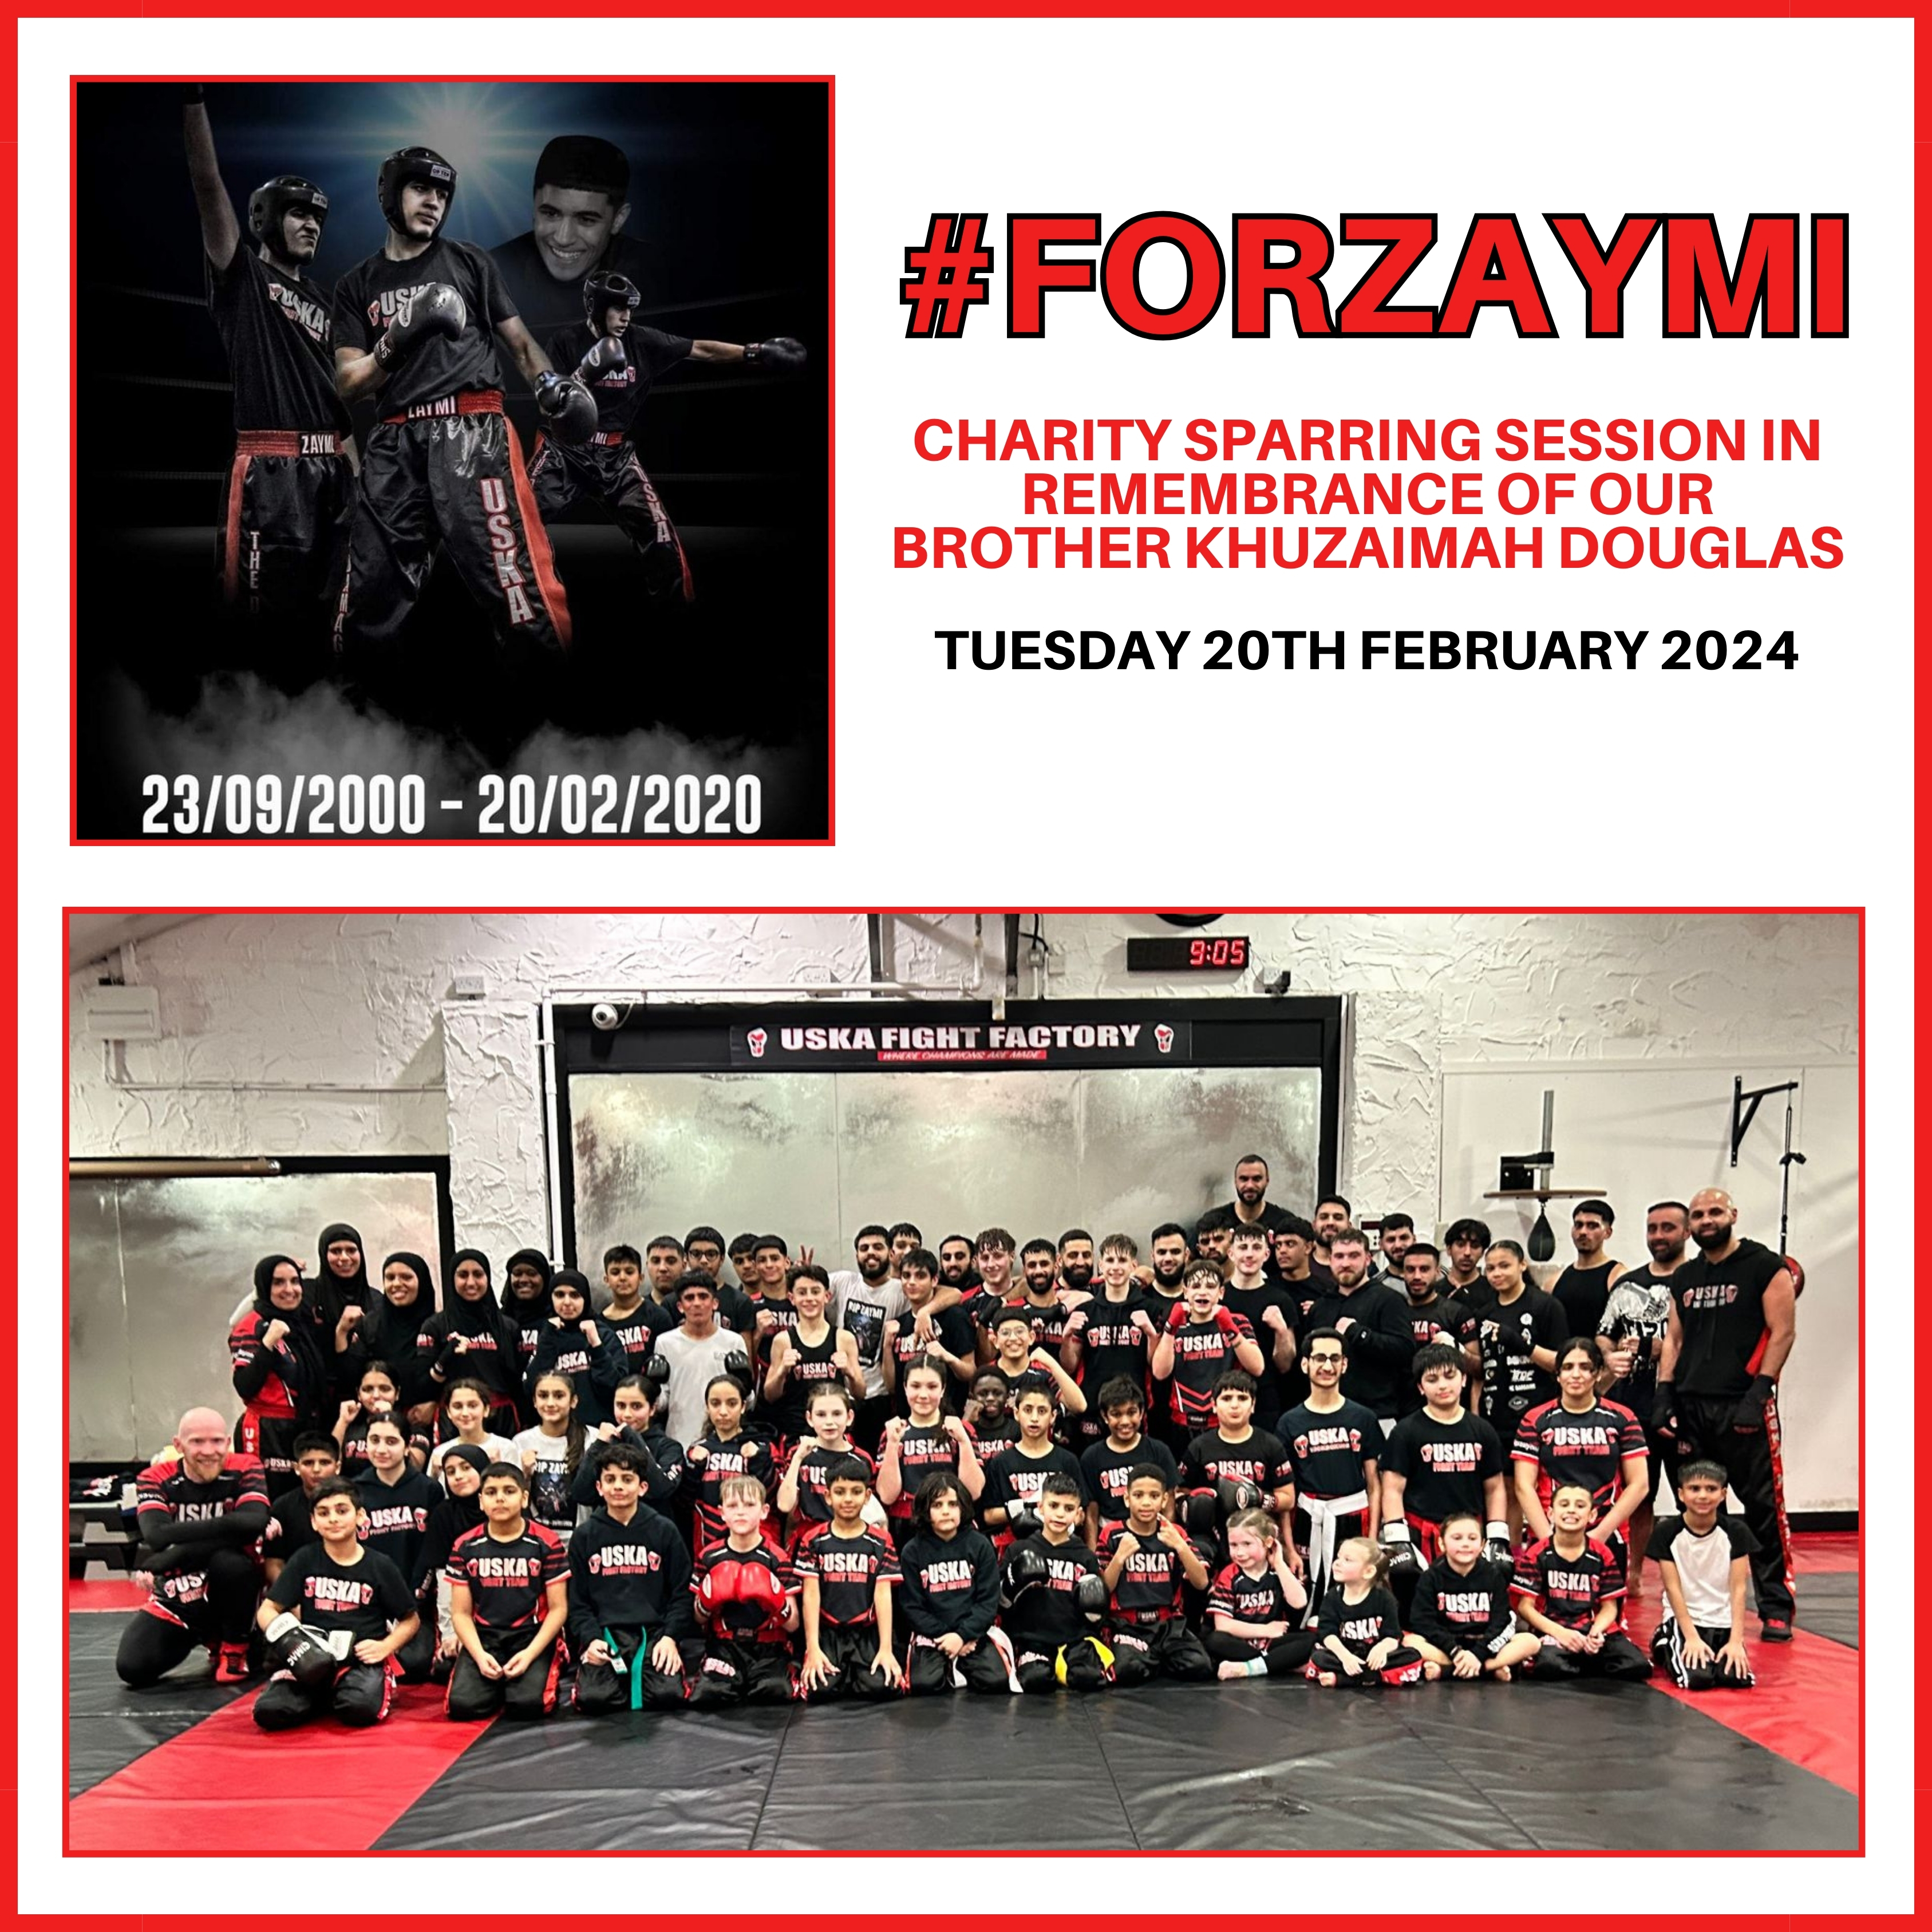 20-02-24 - Charity Sparring Session in remembrance of Khuzaimah Douglas